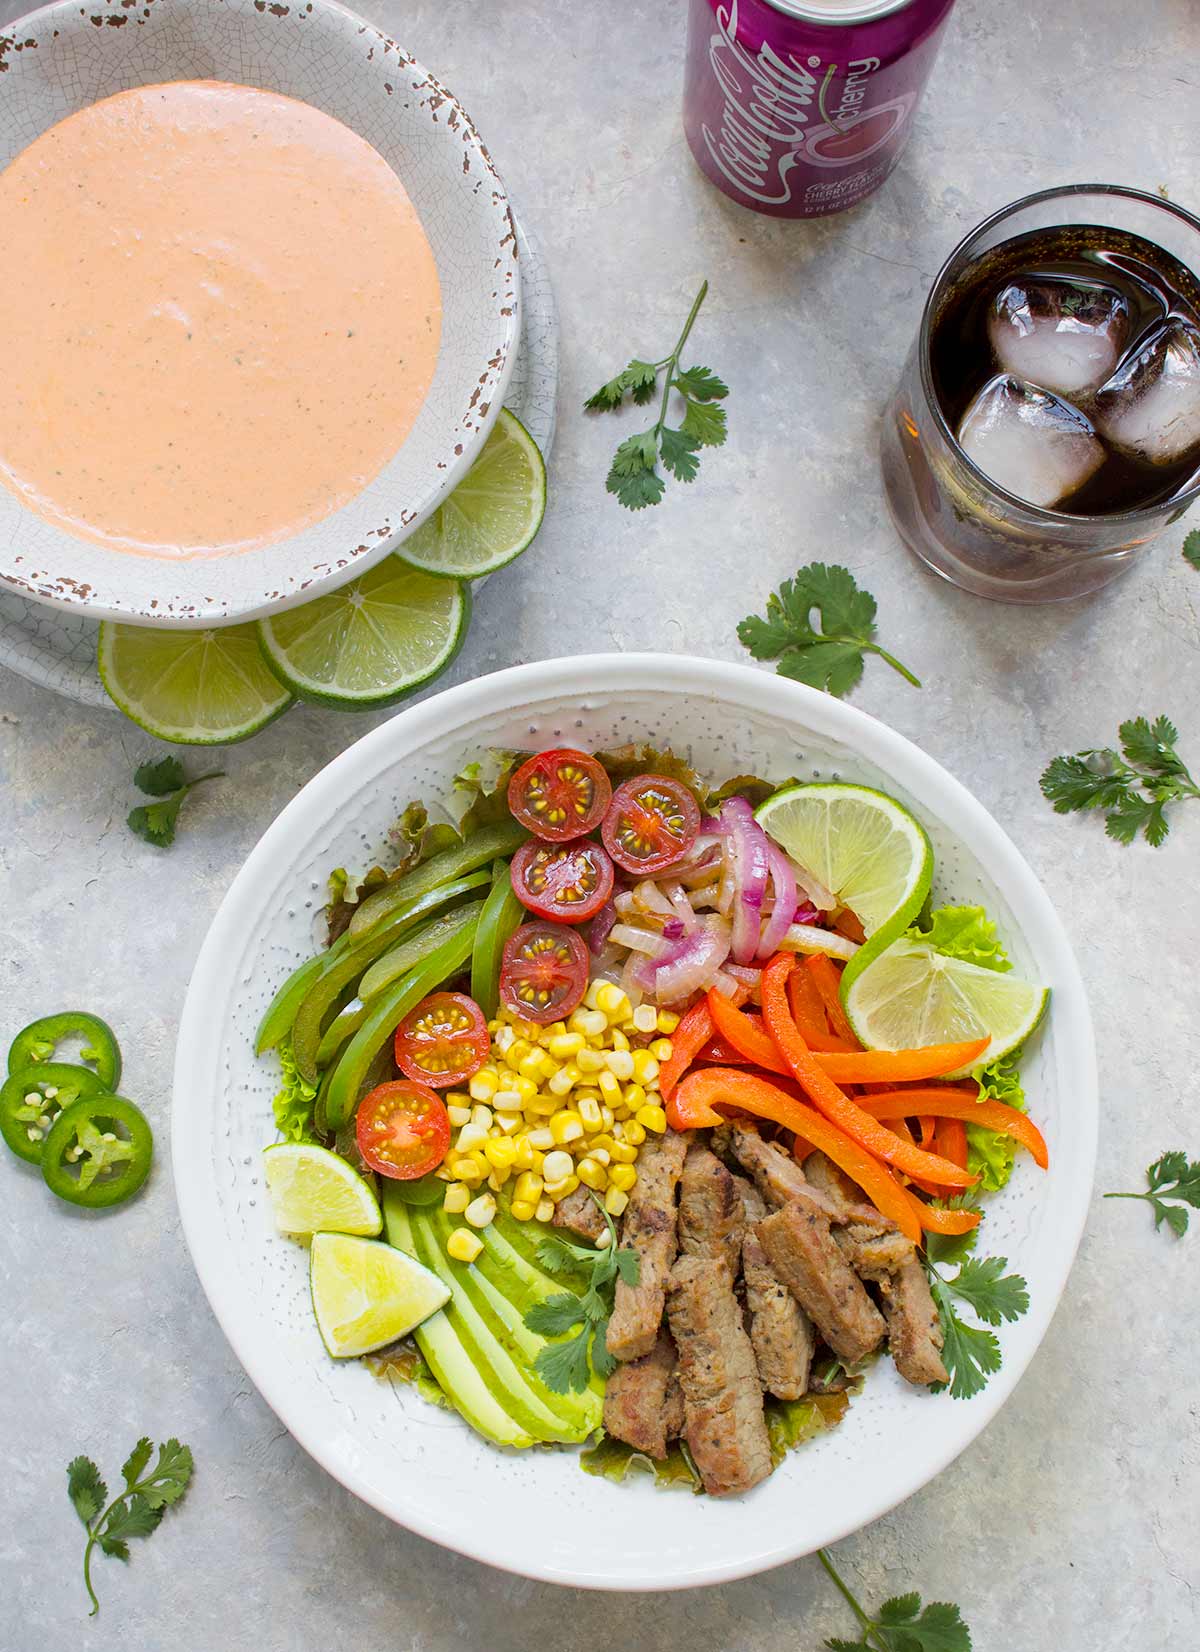 Beef Fajita Salad with Creamy Salsa Dressing, served in a bowl, with a glass of Cherry Coke.